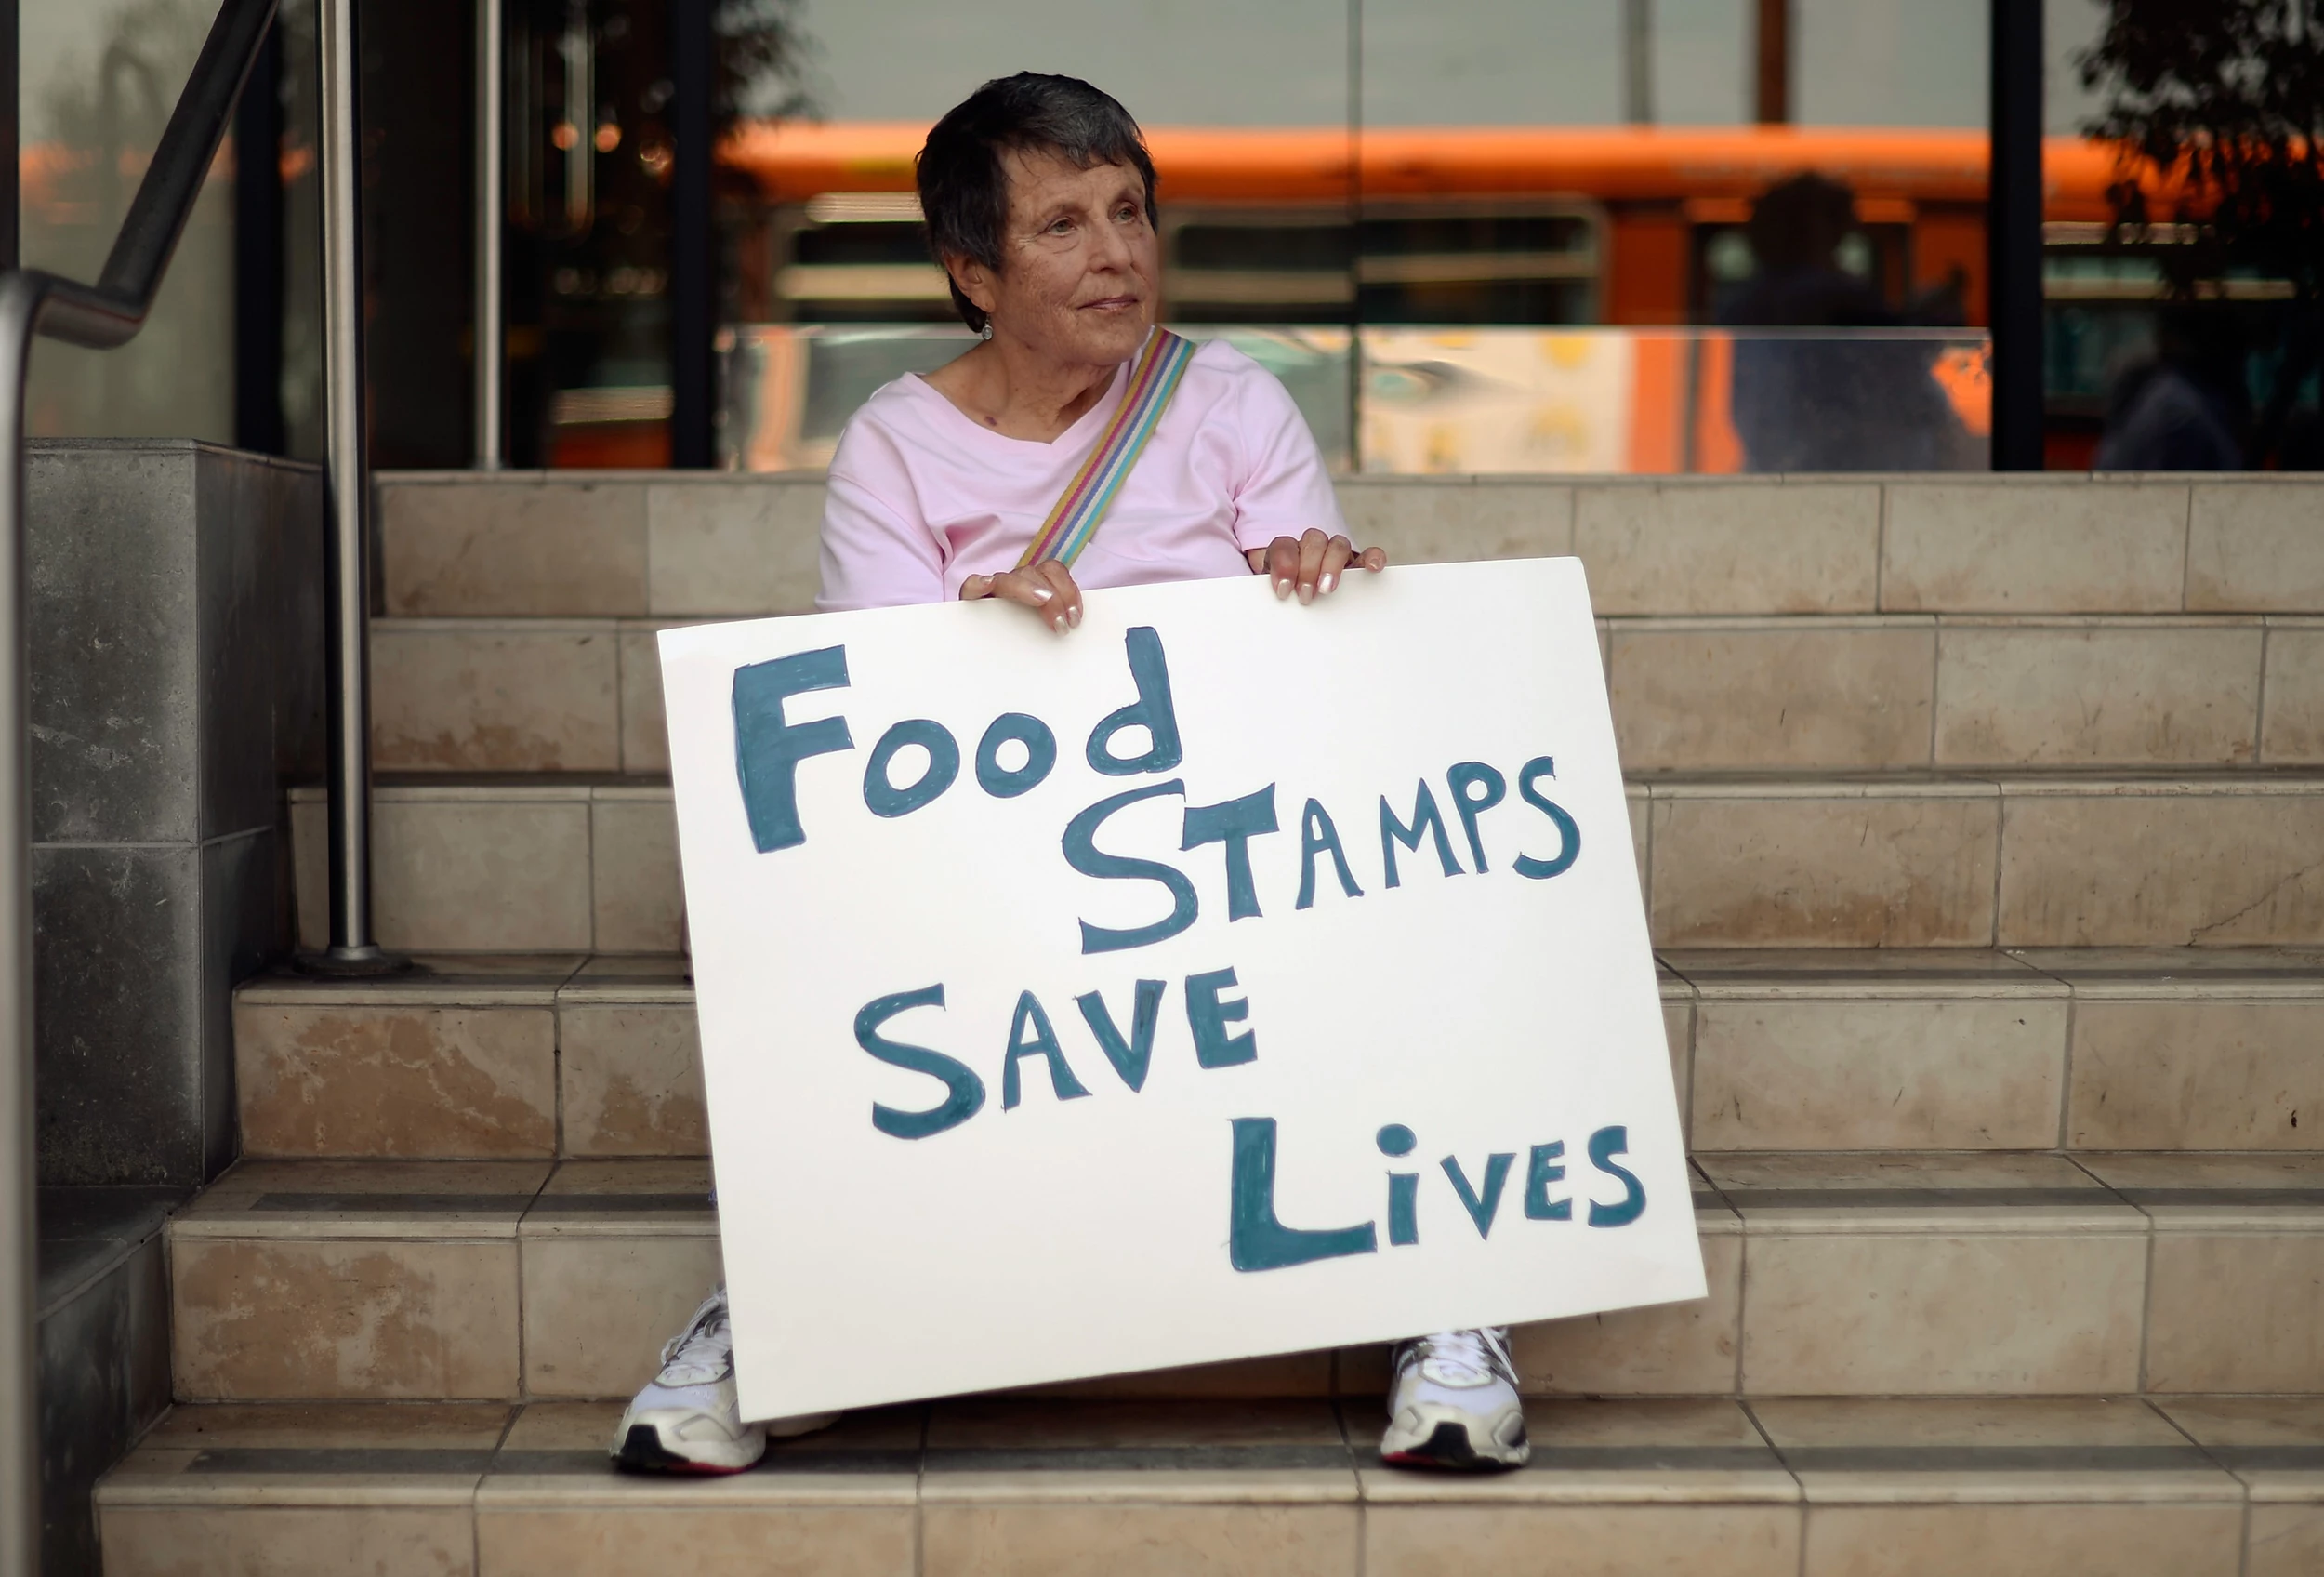 Should You Be Able to Use Food Stamps at Fast Food Restaurants? [POLL]